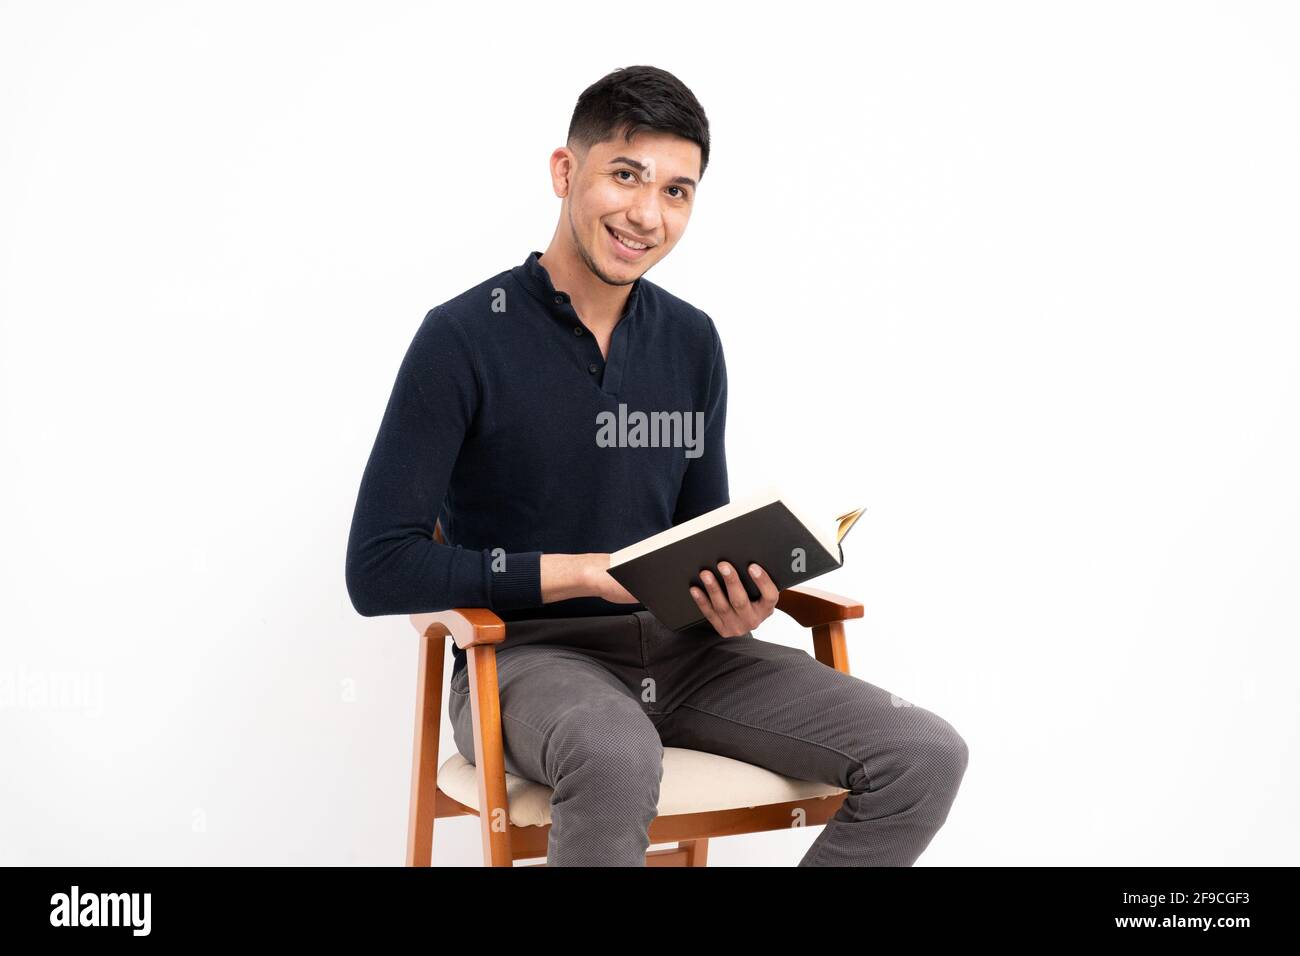 Caucasian man holding a book, smiling and looking at the camera isolated on a white background Stock Photo